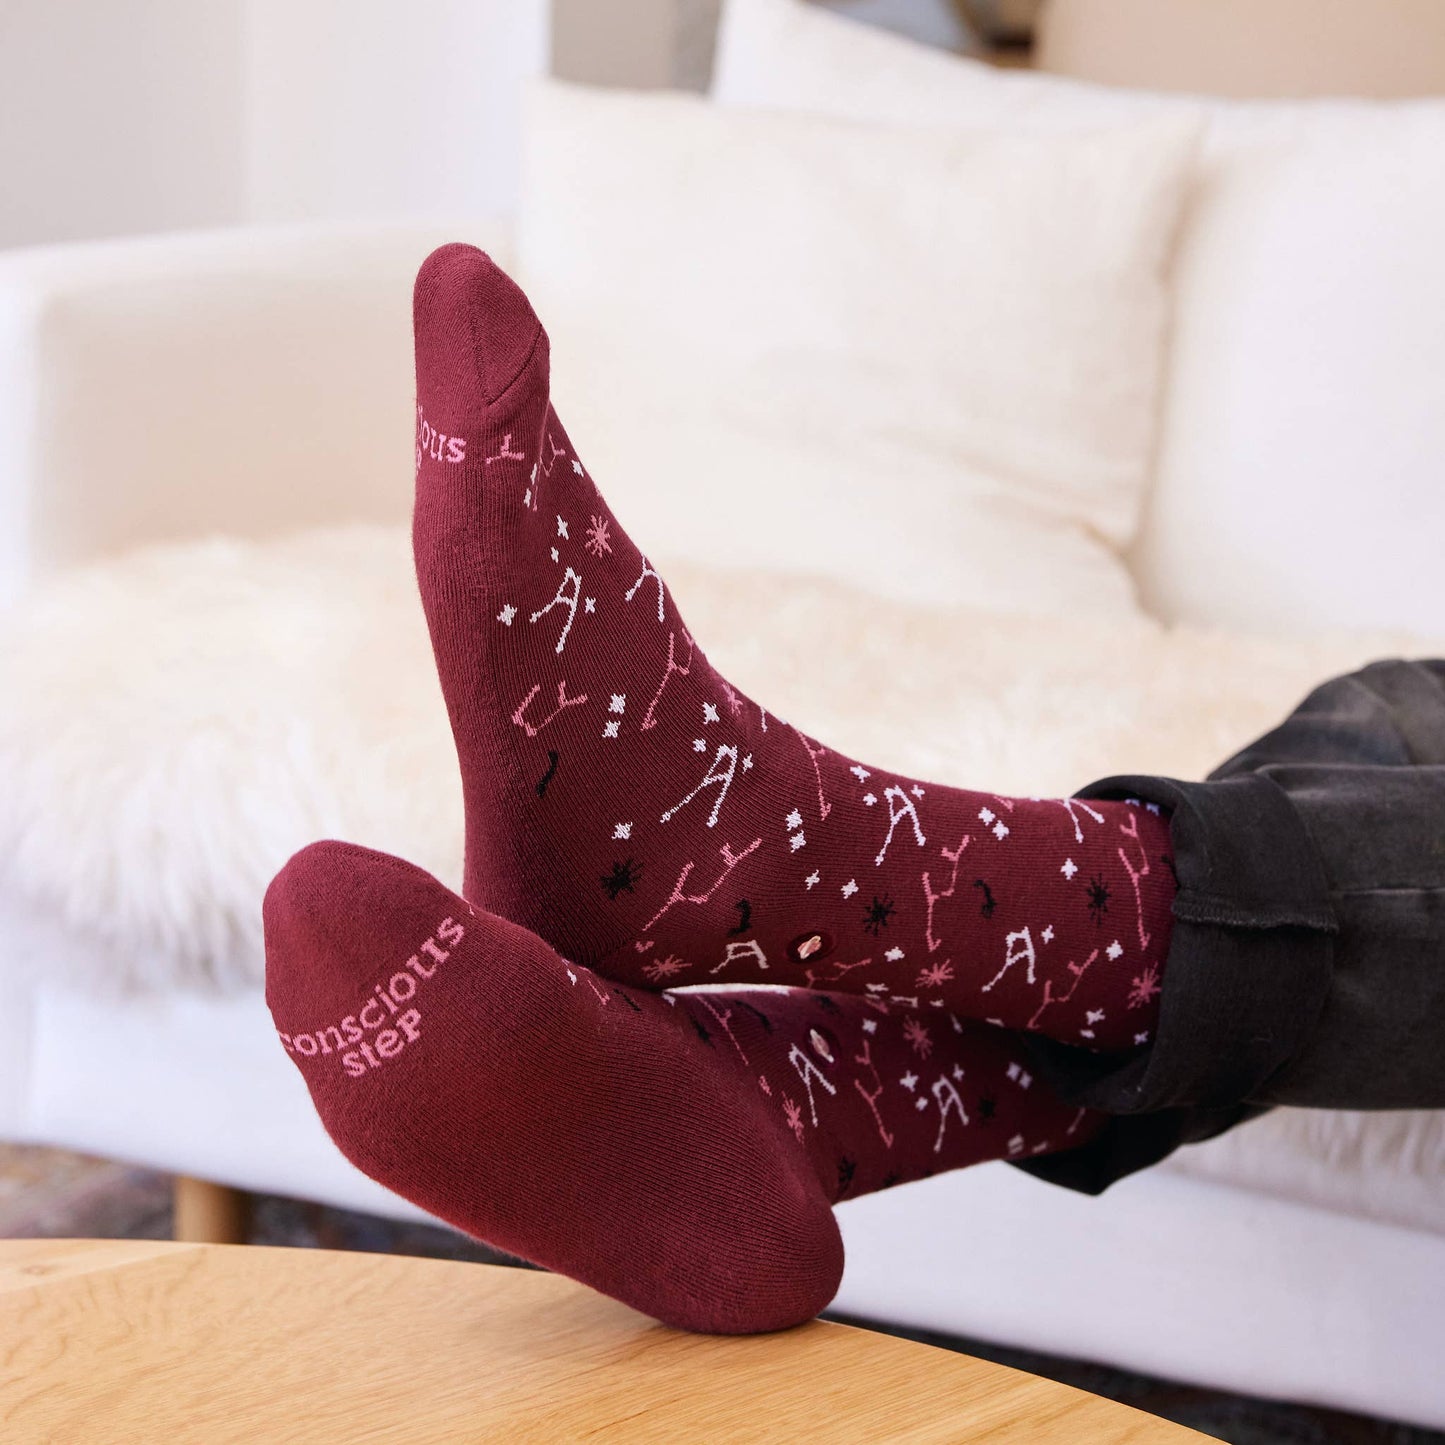 Socks that Support Space Exploration (Maroon Constellations): Small